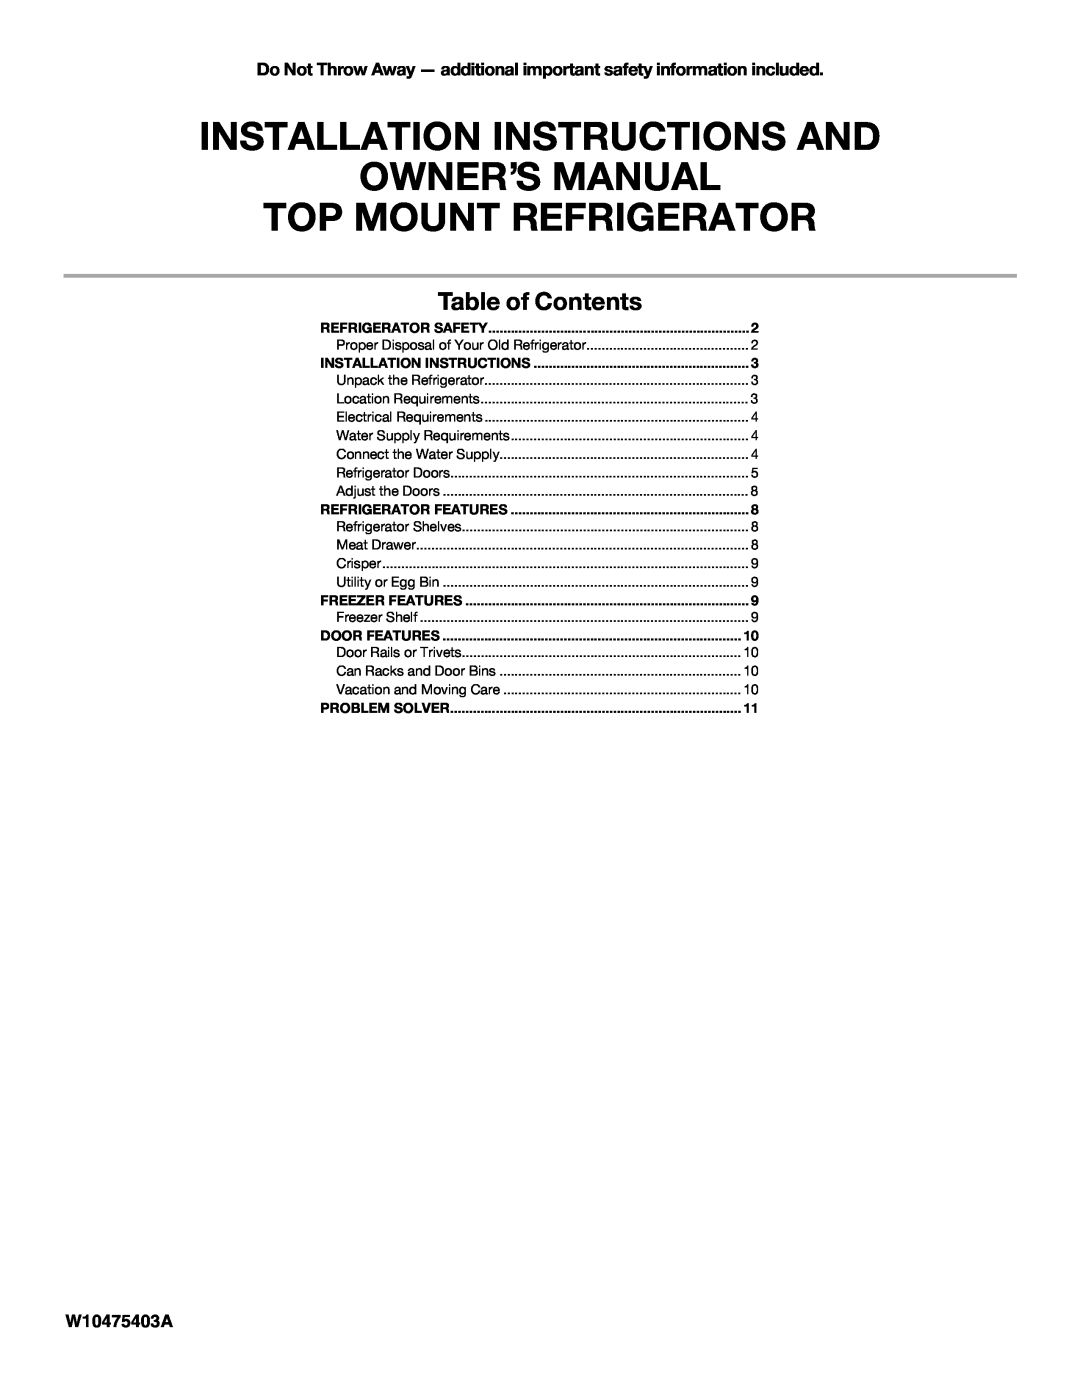 Whirlpool W10475403A installation instructions Table of Contents, Can Racks and Door Bins, Unpack the Refrigerator 